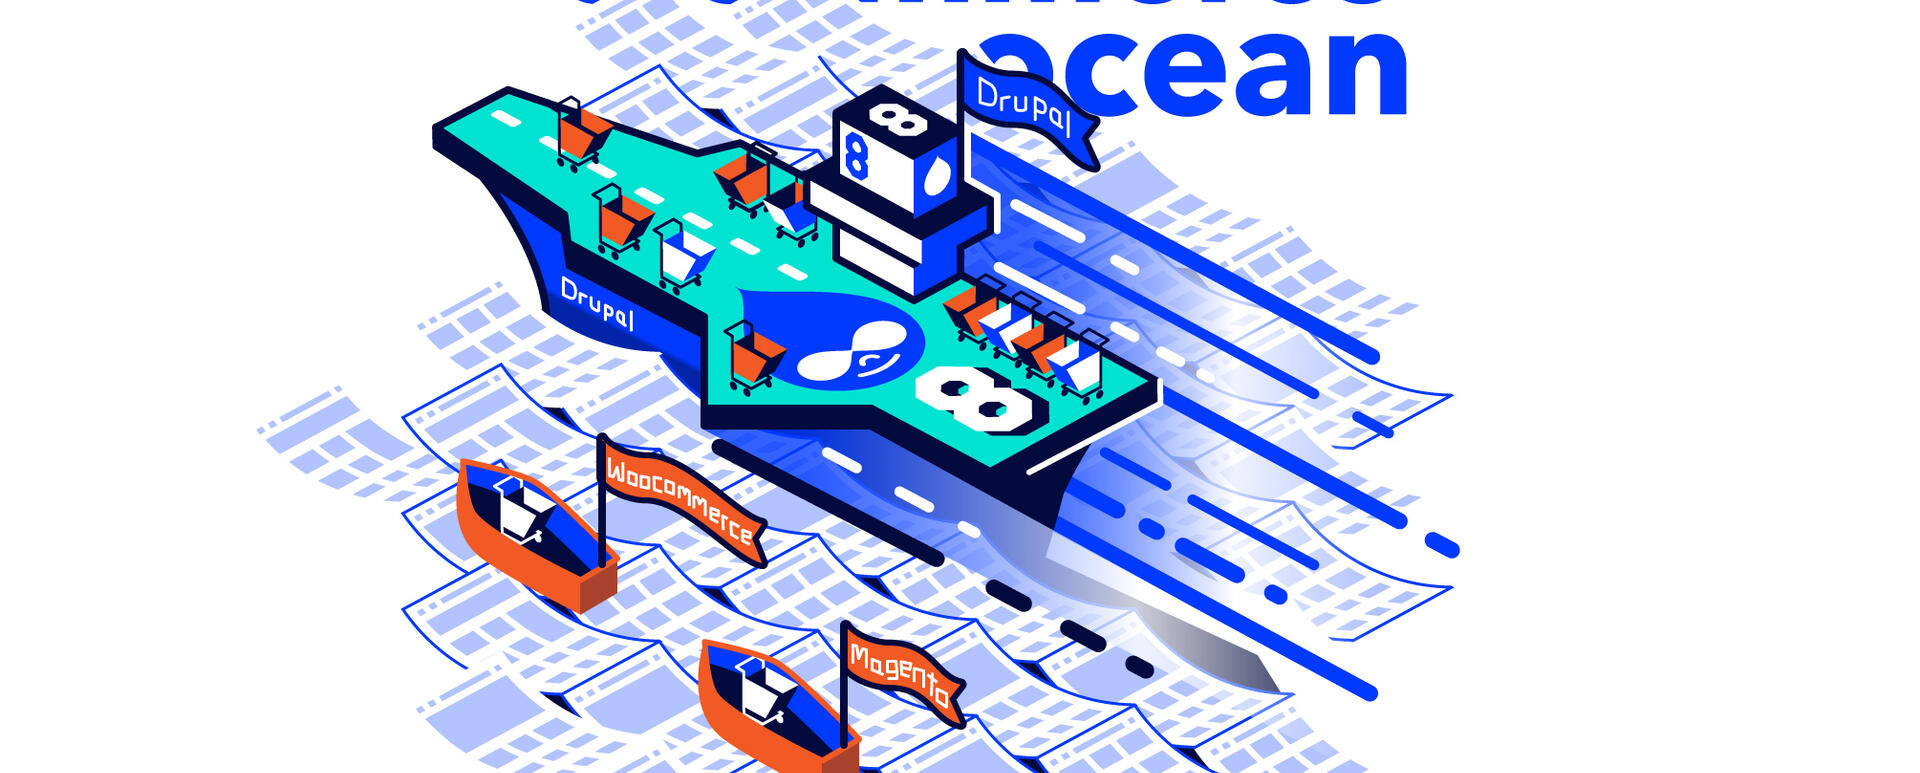 An aircraft carrier with Drupal logo is sailing on E-commerce ocean. Several carts are ready to take off. Small, rowing boats, labelled "woocommerce" and "magento" are sailing behind 